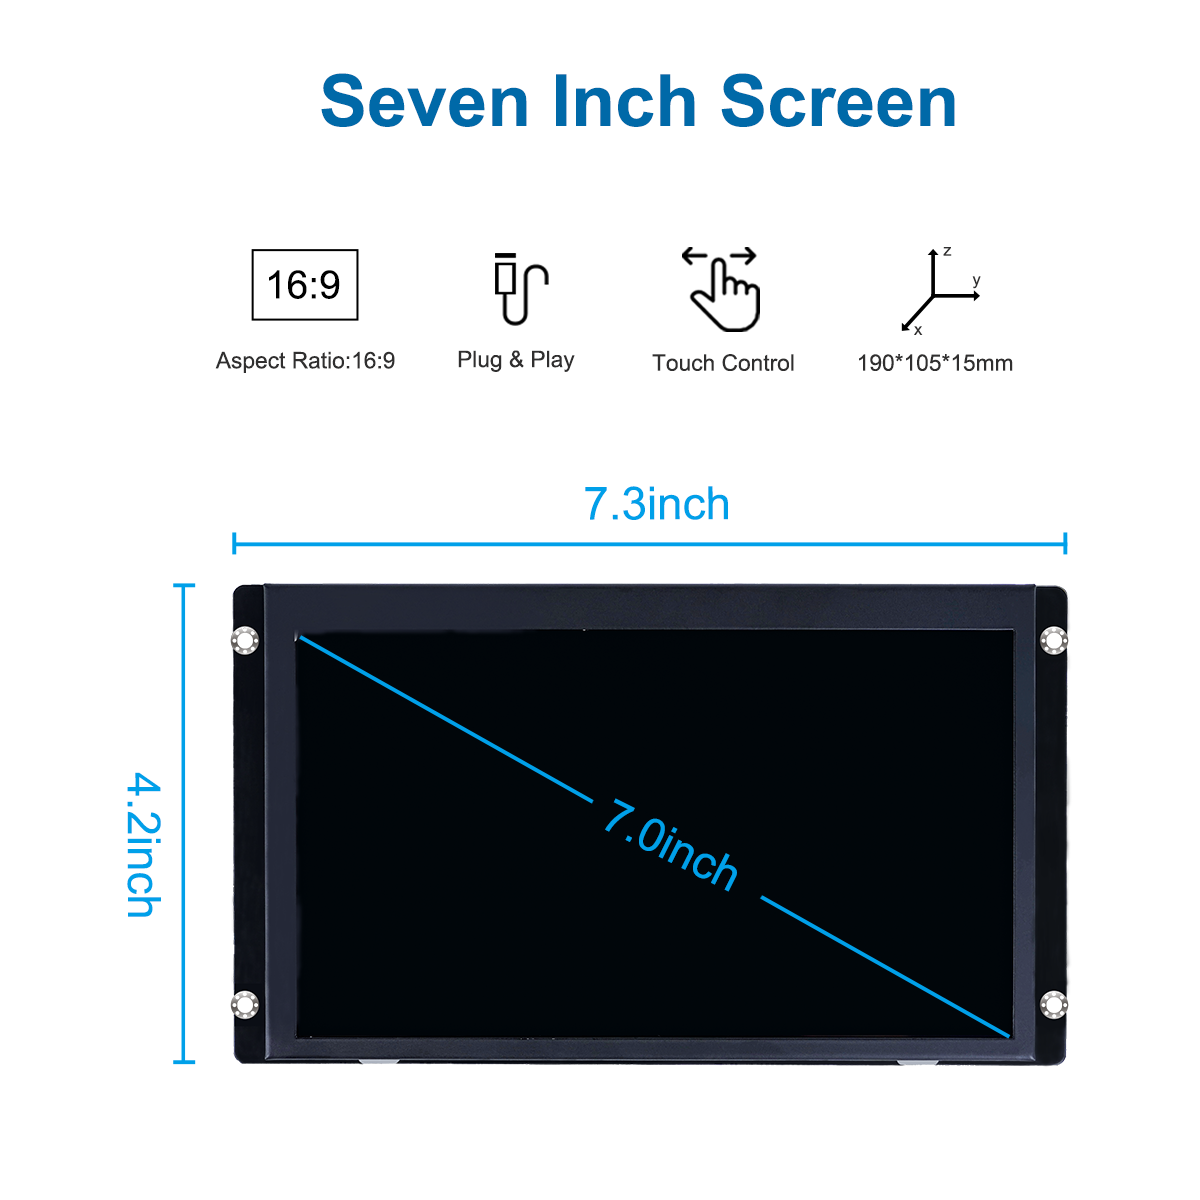 Open Android Computer/7 Inch Touchscreen/Intelligent Interactive Panel for Equipment Control/Support for MIPI,LVDS,USB and Other Signals/Support for Secondary Development/Provide Source Code